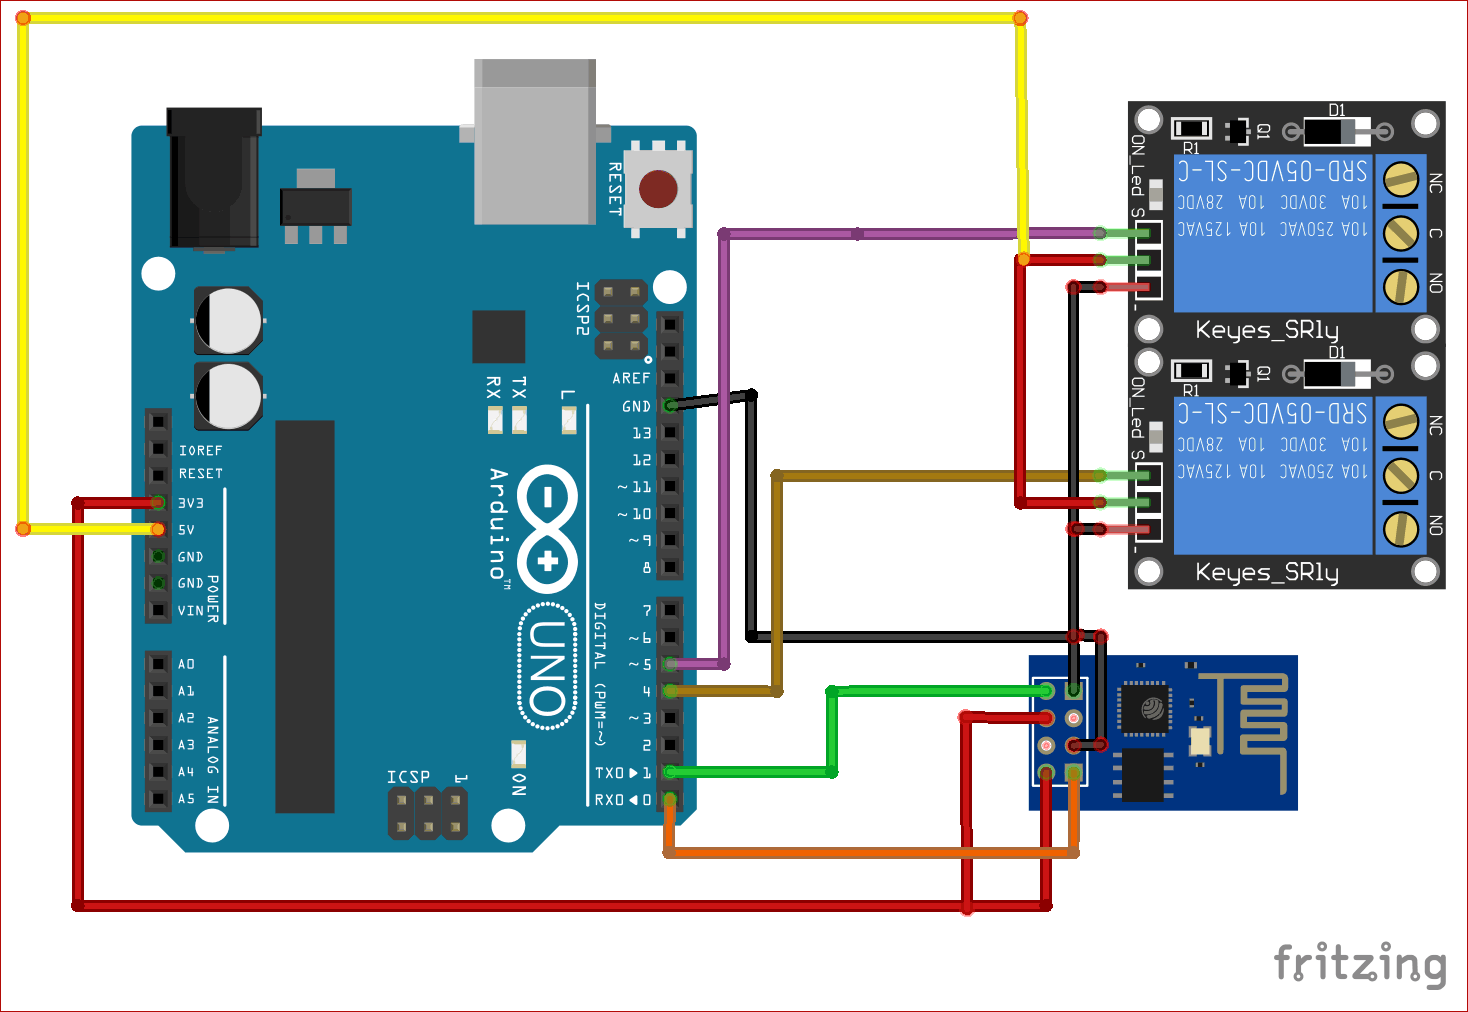 Circuit Diagram for Arduino based Amazon Alexa Controlled Home Automation